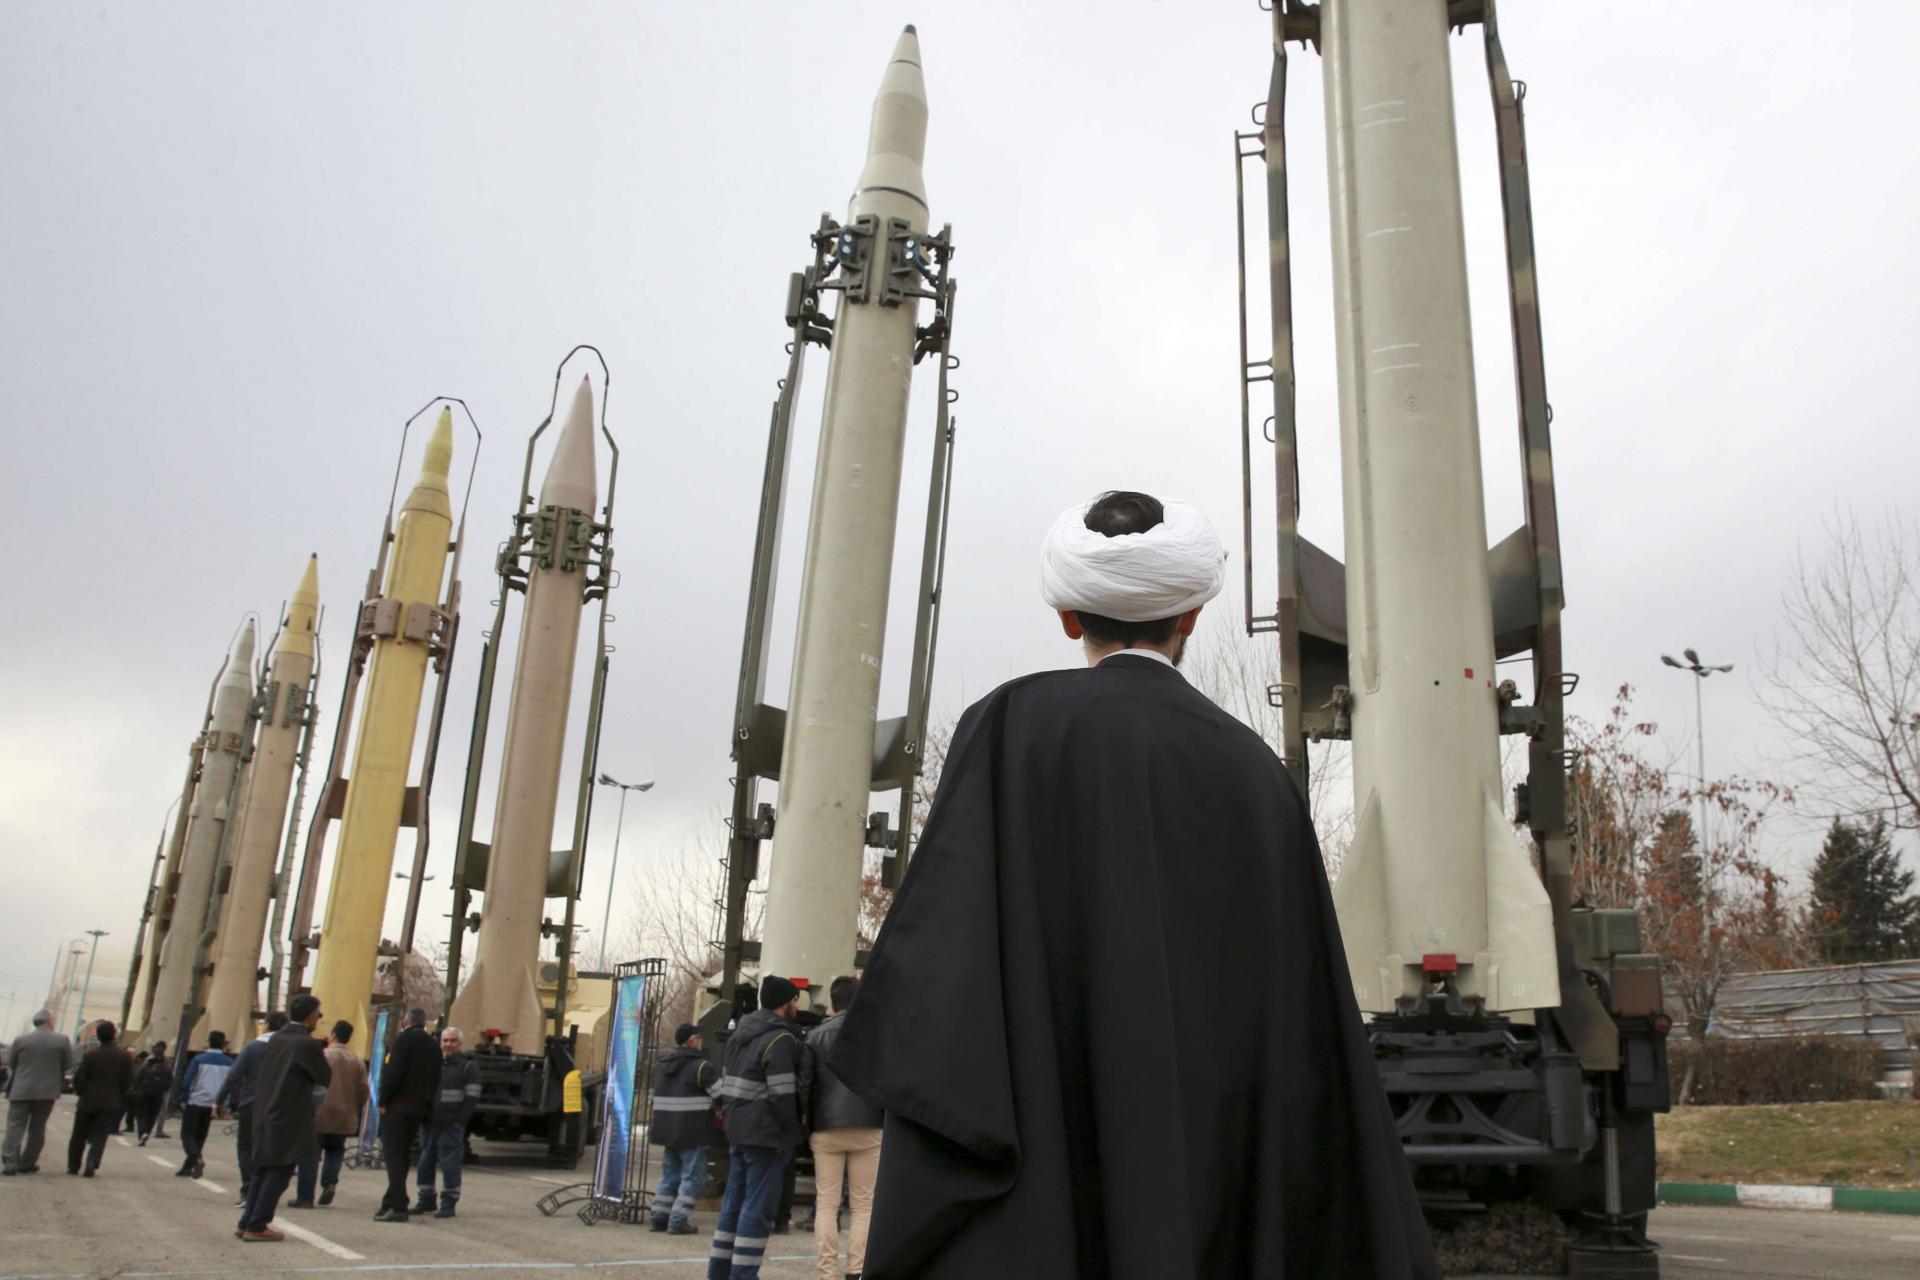  The United Nations called on Iran in 2015 to refrain from developing ballistic missiles for eight years.